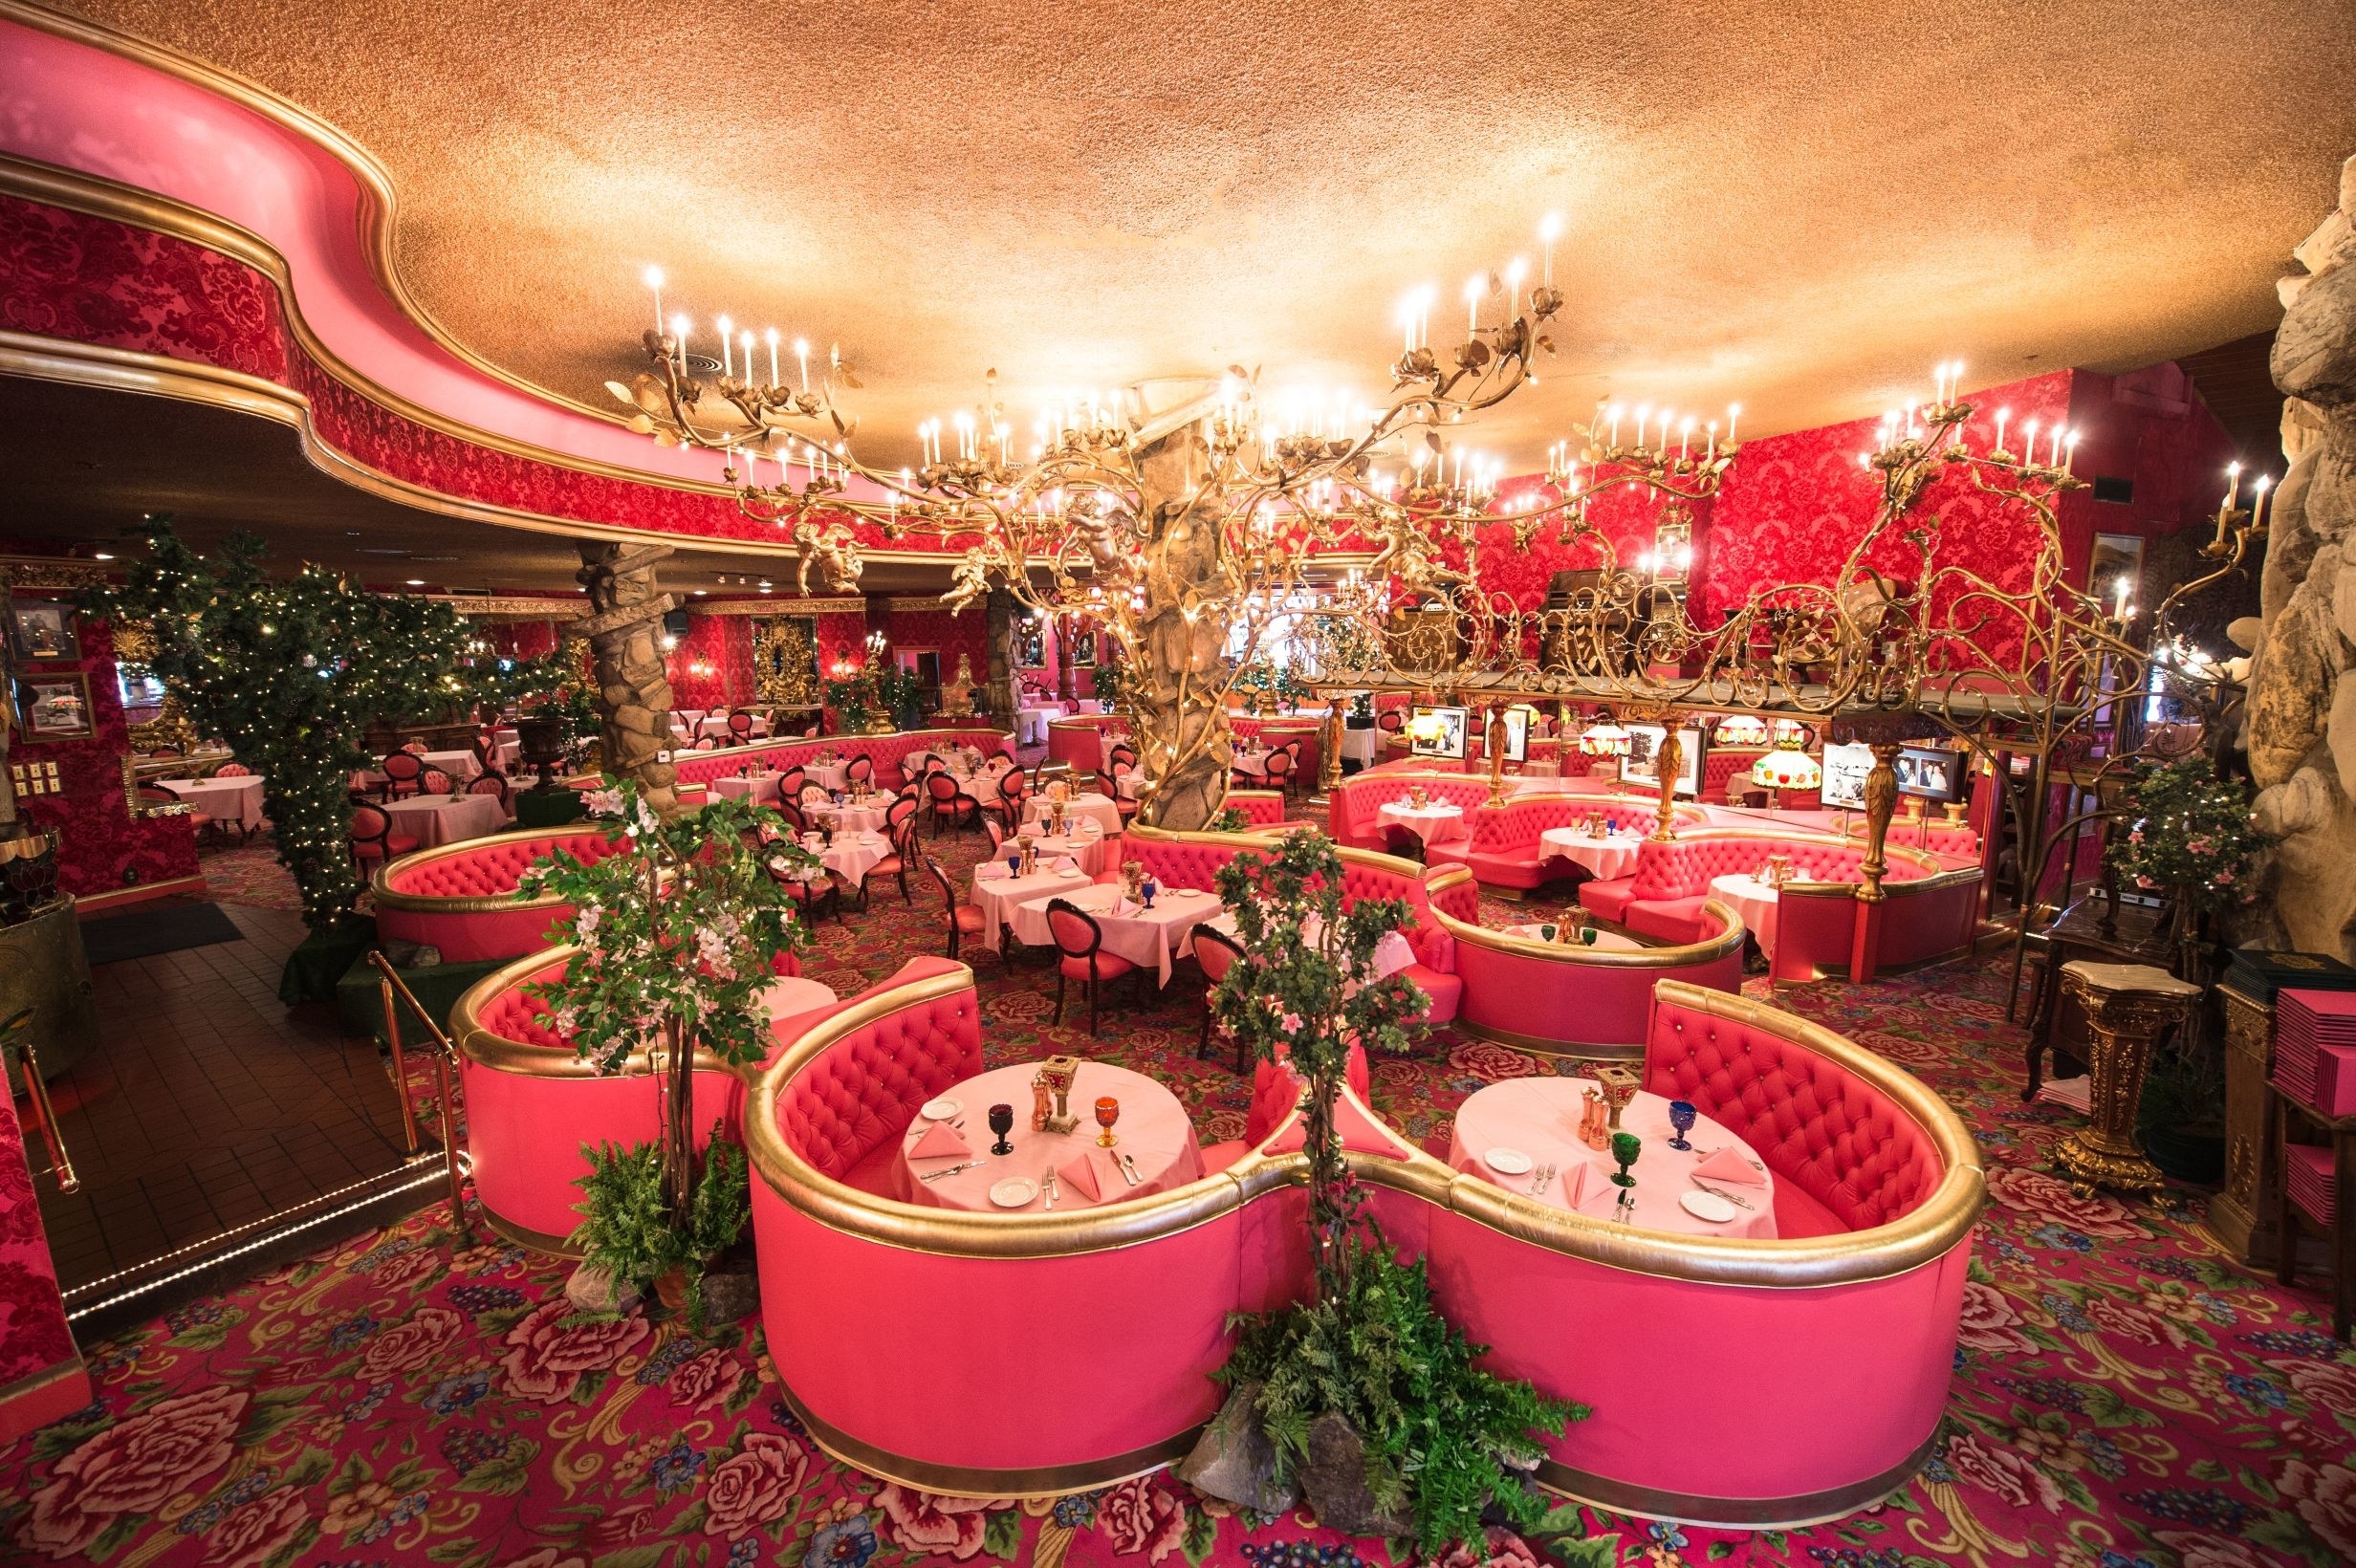 A hotel dining room with bright pink booths and chandeliers 